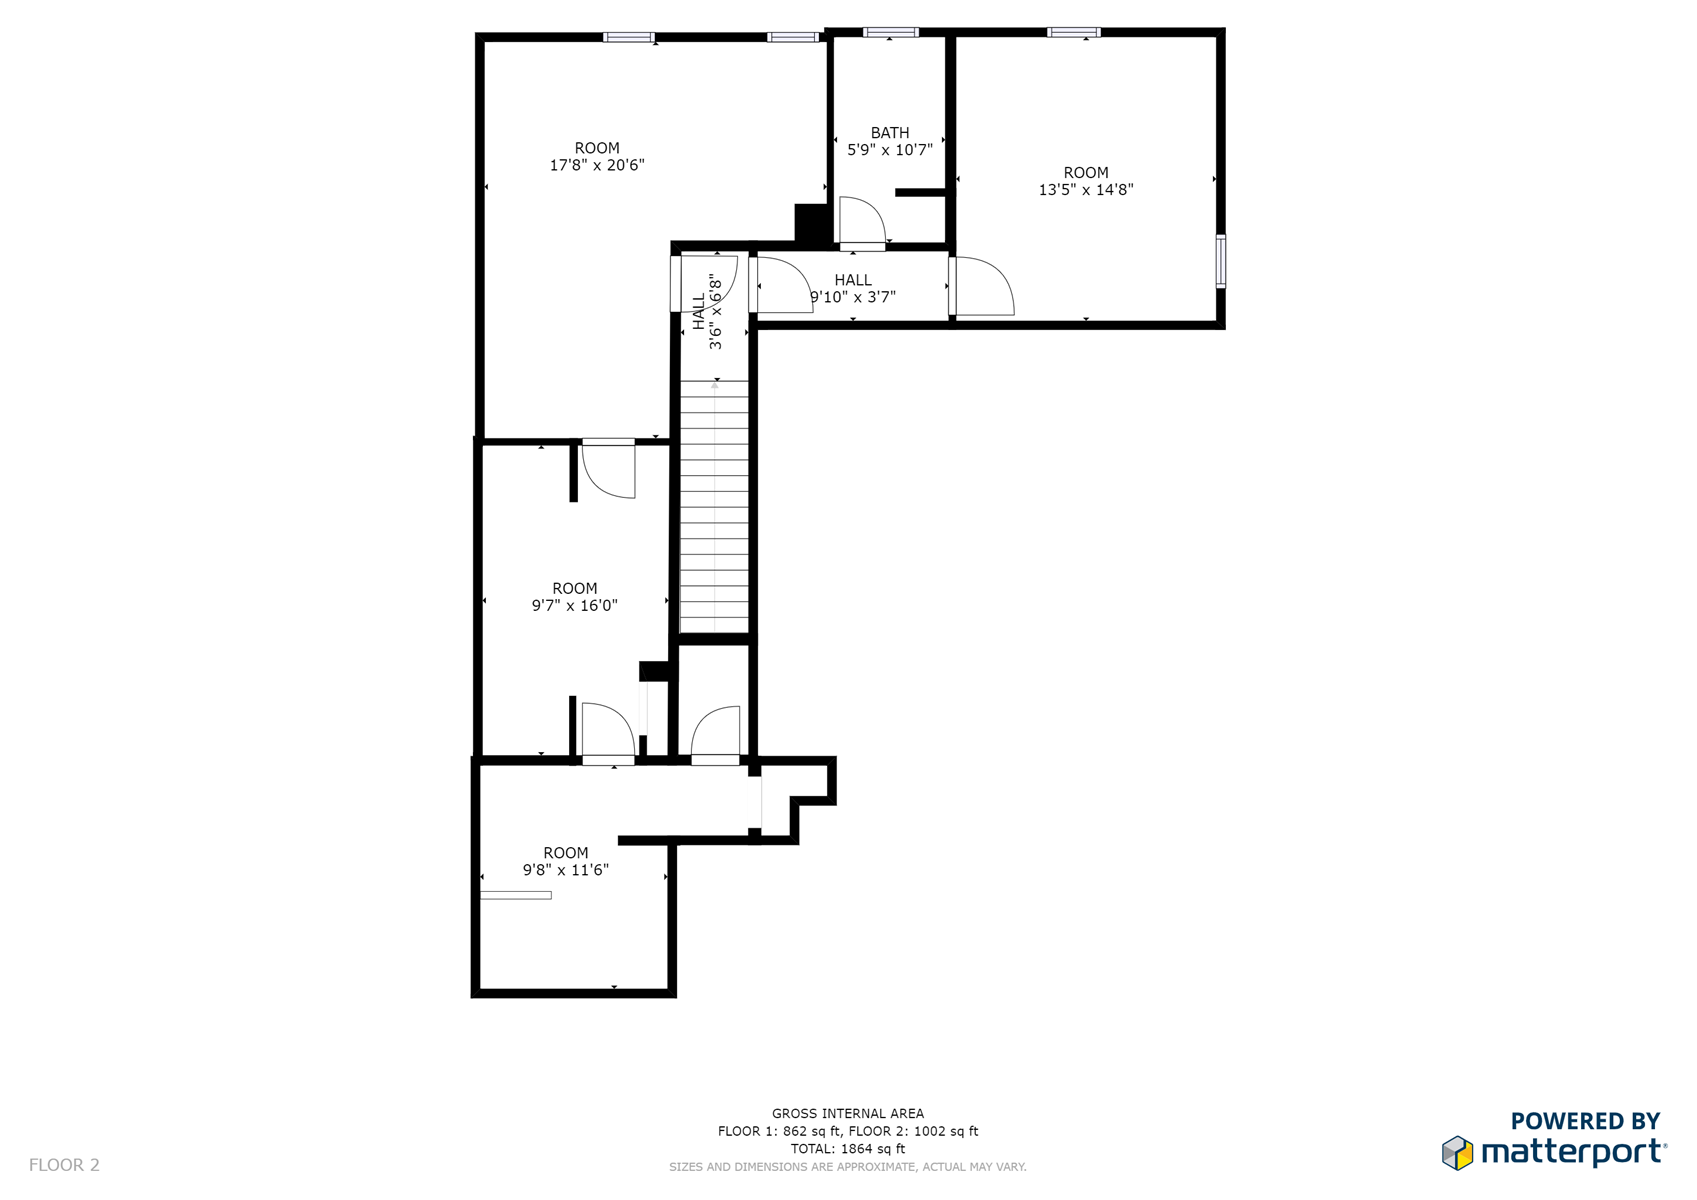 Floor Plan for Water Street Residence A: Located just 400 feet from the Plaza! 